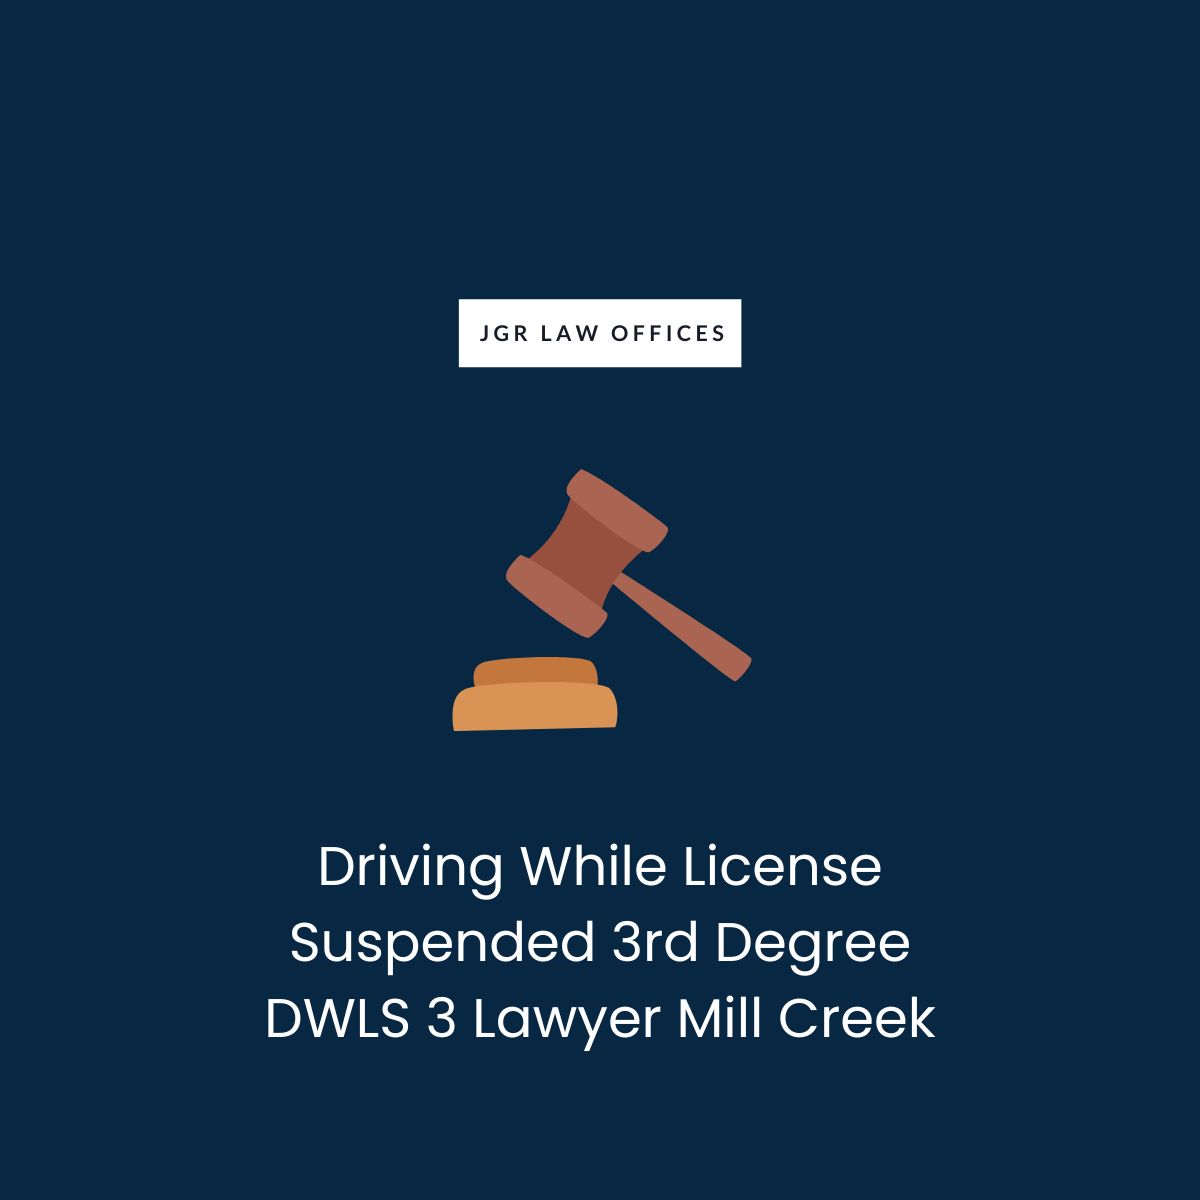 Driving While License Suspended 3rd Degree DWLS 3 Attorney Mill Creek Driving While License Suspended 3rd Degree DWLS 3